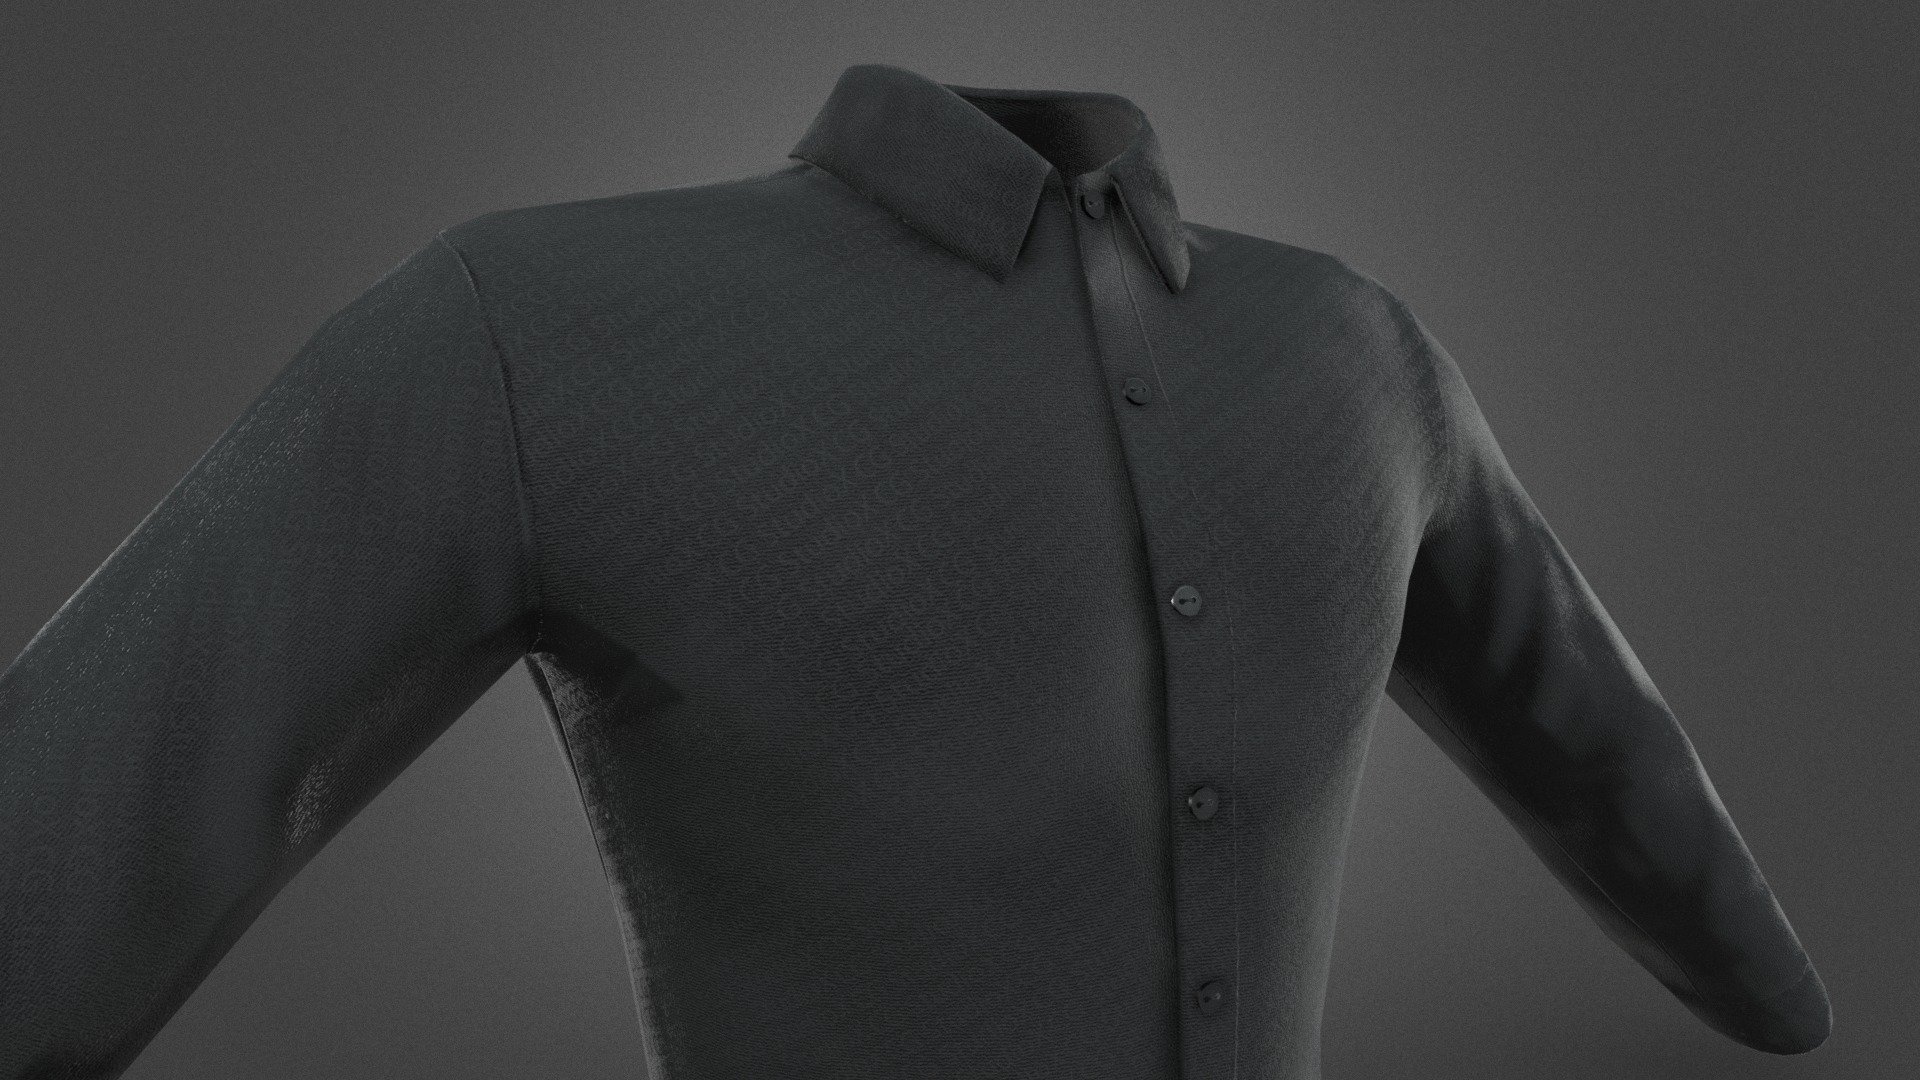 CG StudioX Present :
Black Suit Shirt lowpoly/PBR


This is Black Suit Shirt Comes with Specular and Metalness PBR.
The photo been rendered using Marmoset Toolbag 4 (real time game engine )

Features :

Comes with Specular and Metalness PBR 4K texture .
Good topology.
Low polygon geometry.
The Model is prefect for game for both Specular workflow as in Unity and Metalness as in Unreal engine .
The model also rendered using Marmoset Toolbag 4 with both Specular and Metalness PBR and also included in the product with the full texture.
The texture can be easily adjustable .

Texture :

One set of UV [Albedo -Normal-Metalness -Roughness-Gloss-Specular-Ao] (4096*4096)

Files :
Marmoset Toolbag 4 ,Maya,,FBX,OBj with all the textures.


Contact me for if you have any questions.
 - Black Suit Shirt - Buy Royalty Free 3D model by CG StudioX (@CG_StudioX) 3d model